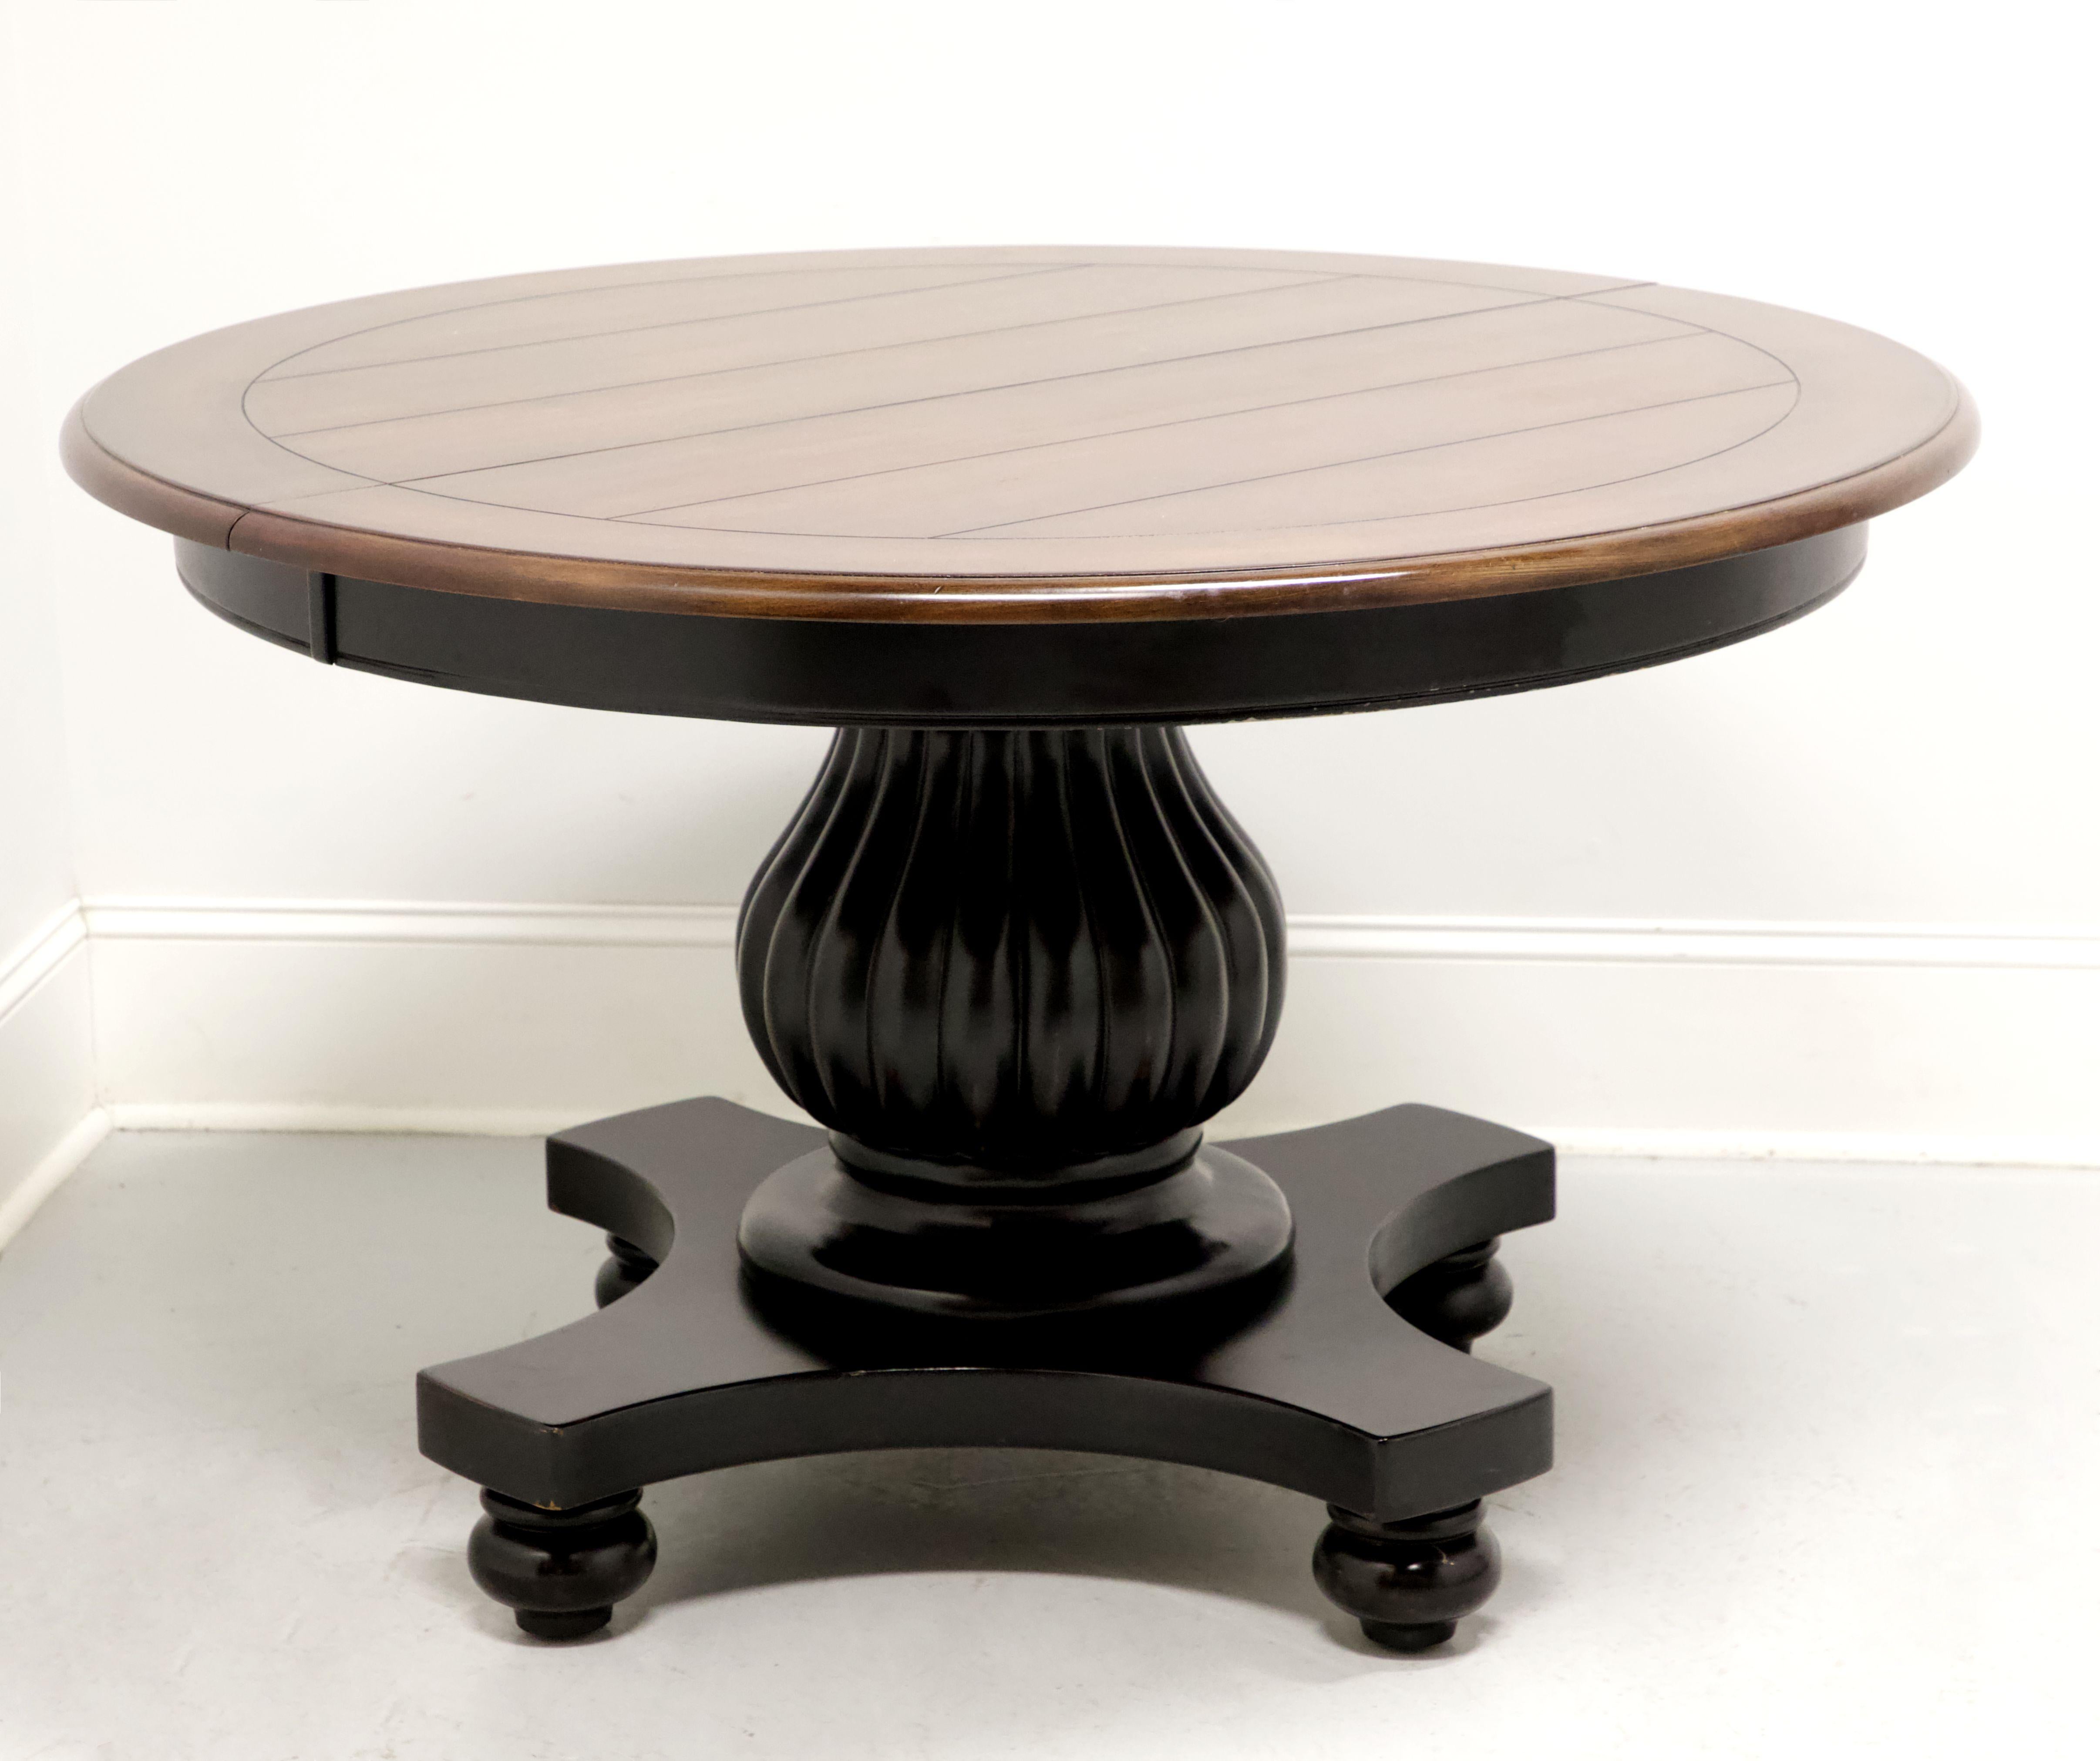 A Cottage / Farmhouse style round pedestal dining table, unbranded. Hardwood with a distressed black painted finish, natural cherry plank style banded top, smooth apron, wide round fluted pedestal base with 